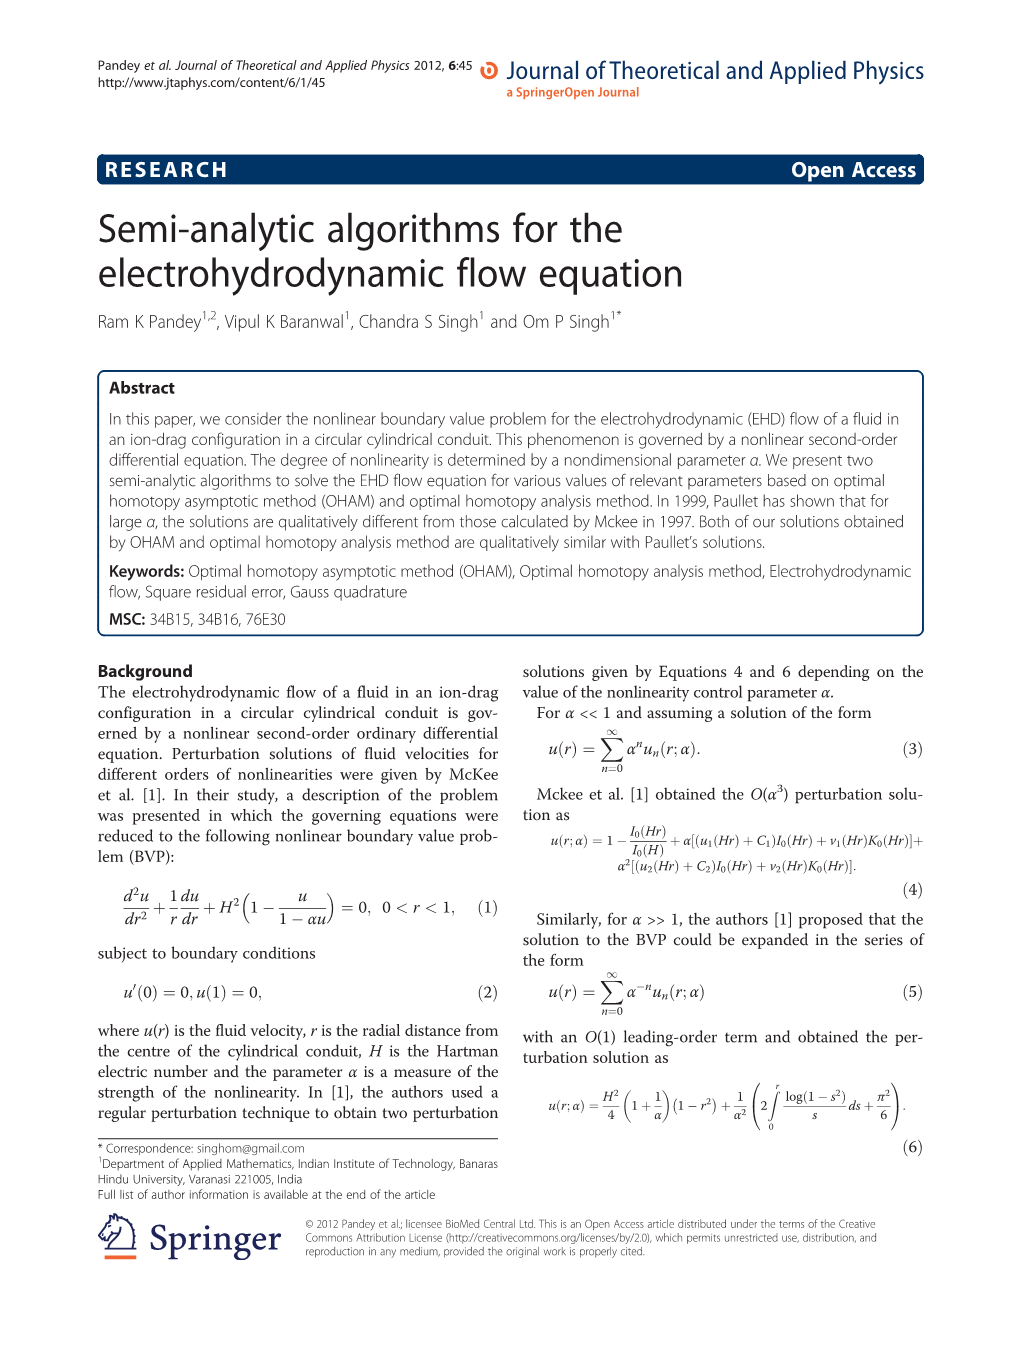 Semi-Analytic Algorithms for the Electrohydrodynamic Flow Equation Ram K Pandey1,2, Vipul K Baranwal1, Chandra S Singh1 and Om P Singh1*